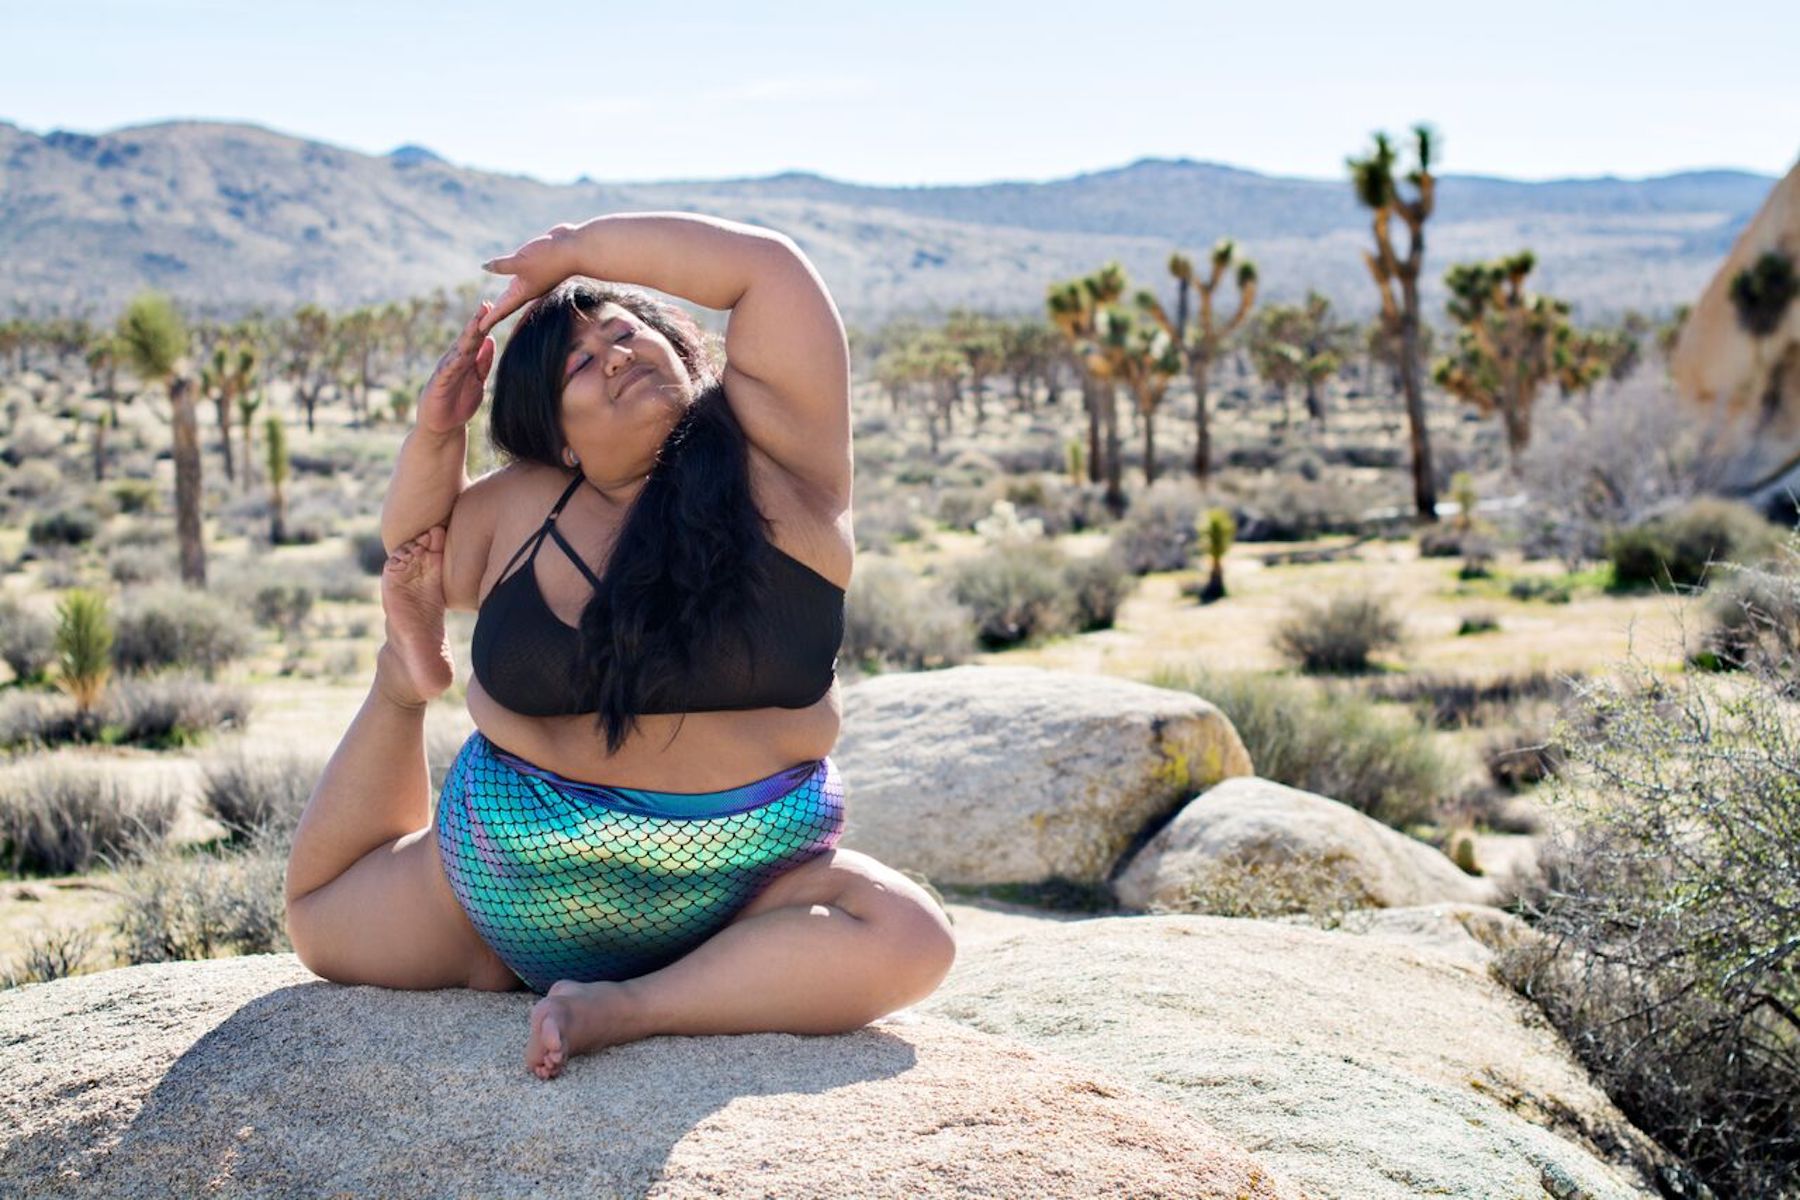 Valerie of Big Gal Yoga talks about her yoga story, diversity in